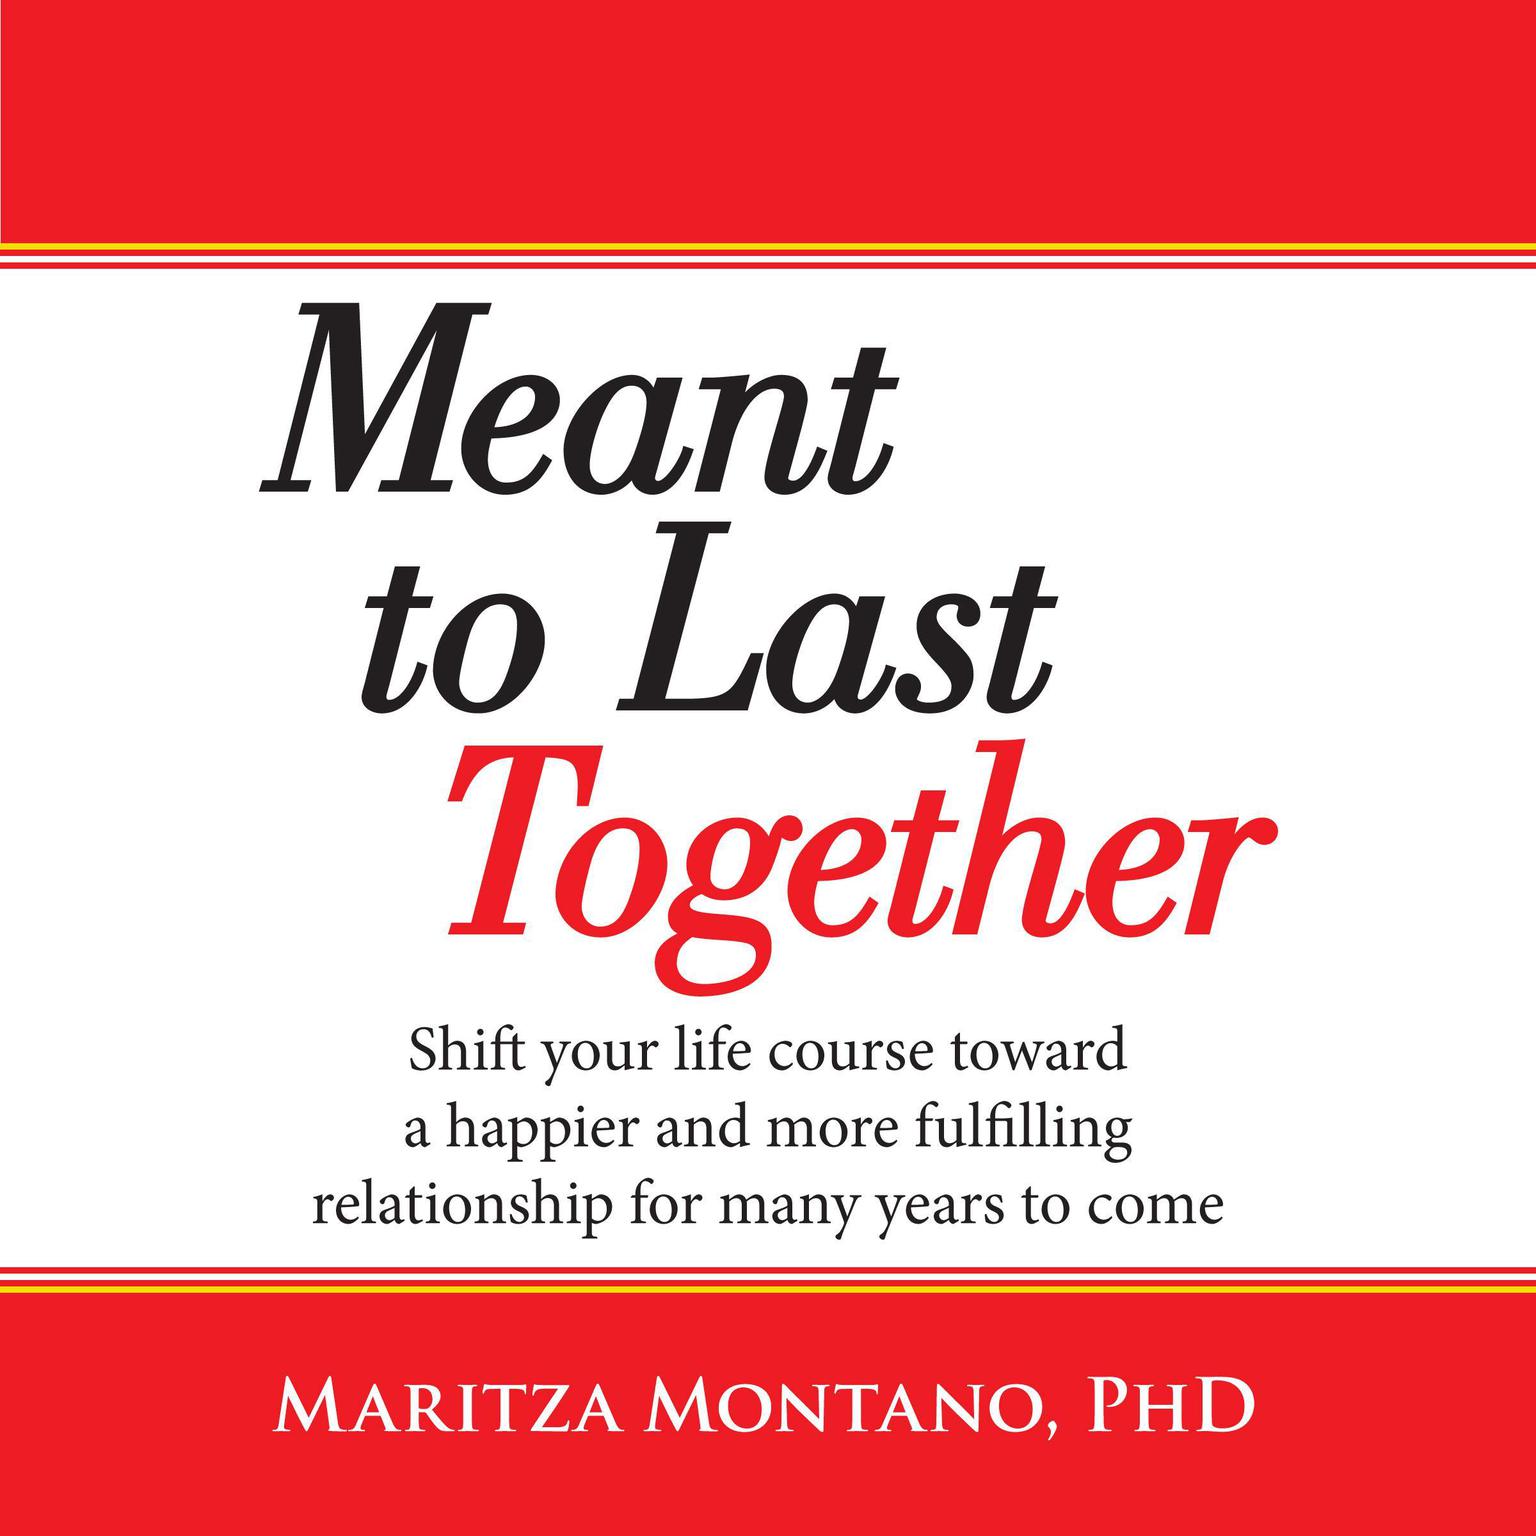 Meant to Last Together: Shift your life course toward a happier and more fulfilling relationship for many years to come: Shift Your Life Course Toward a Happier and More Fulfilling Relationship for Many Years to Come Audiobook, by Maritza Montano